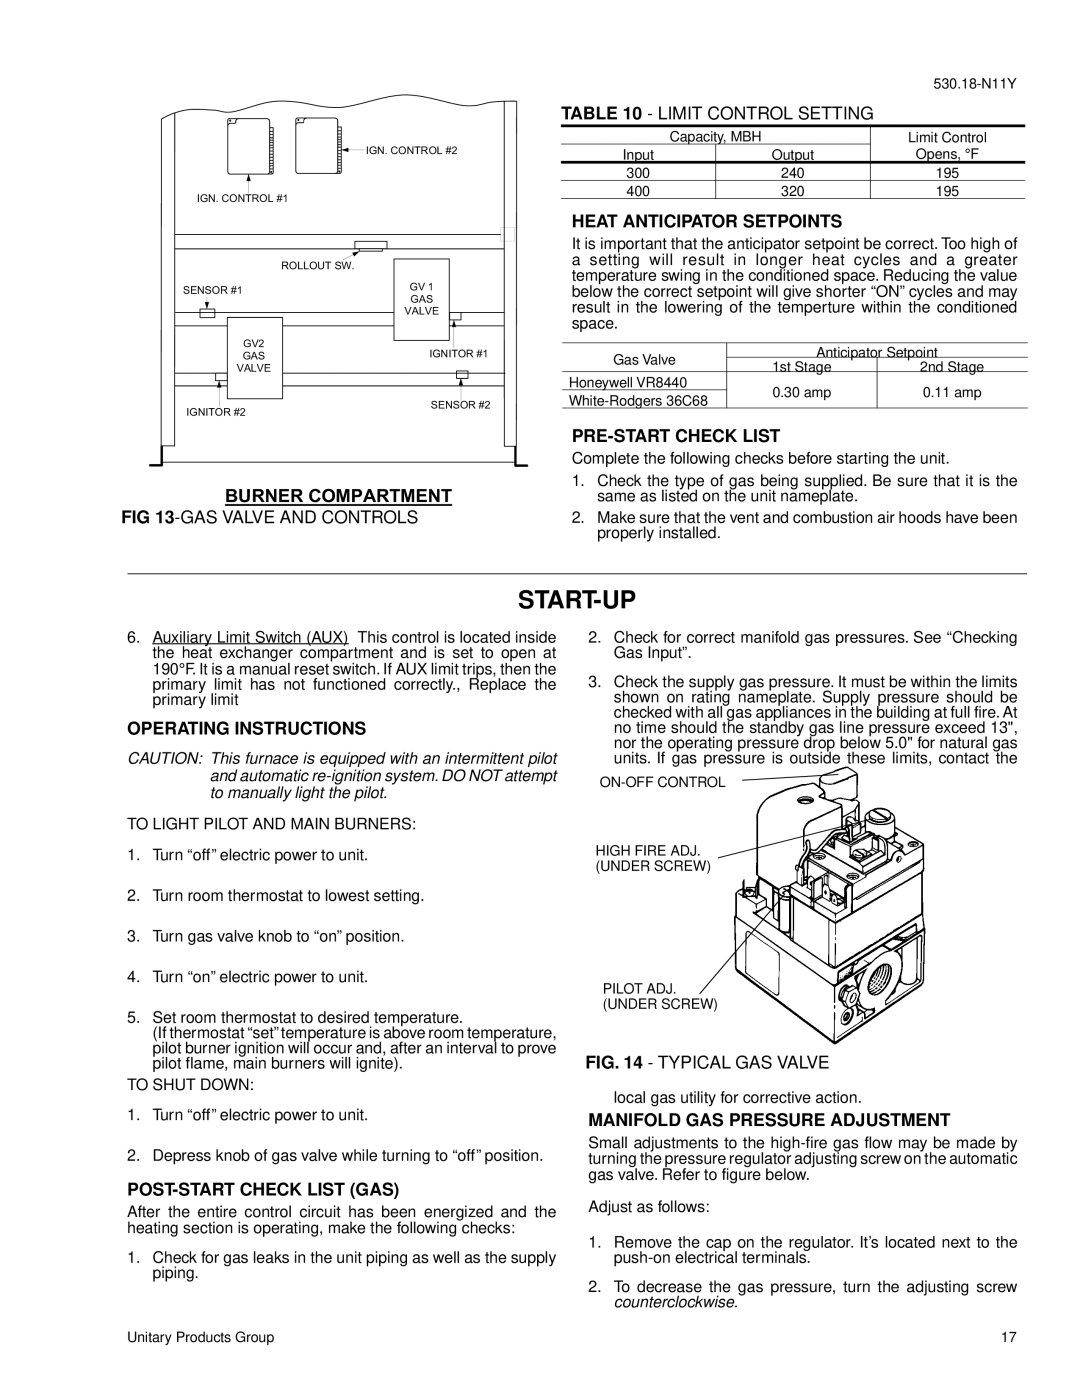 York D2CG300, D2CE Start-Up, Limit Control Setting, Pre-Startcheck List, Gasvalve And Controls, Operating Instructions 